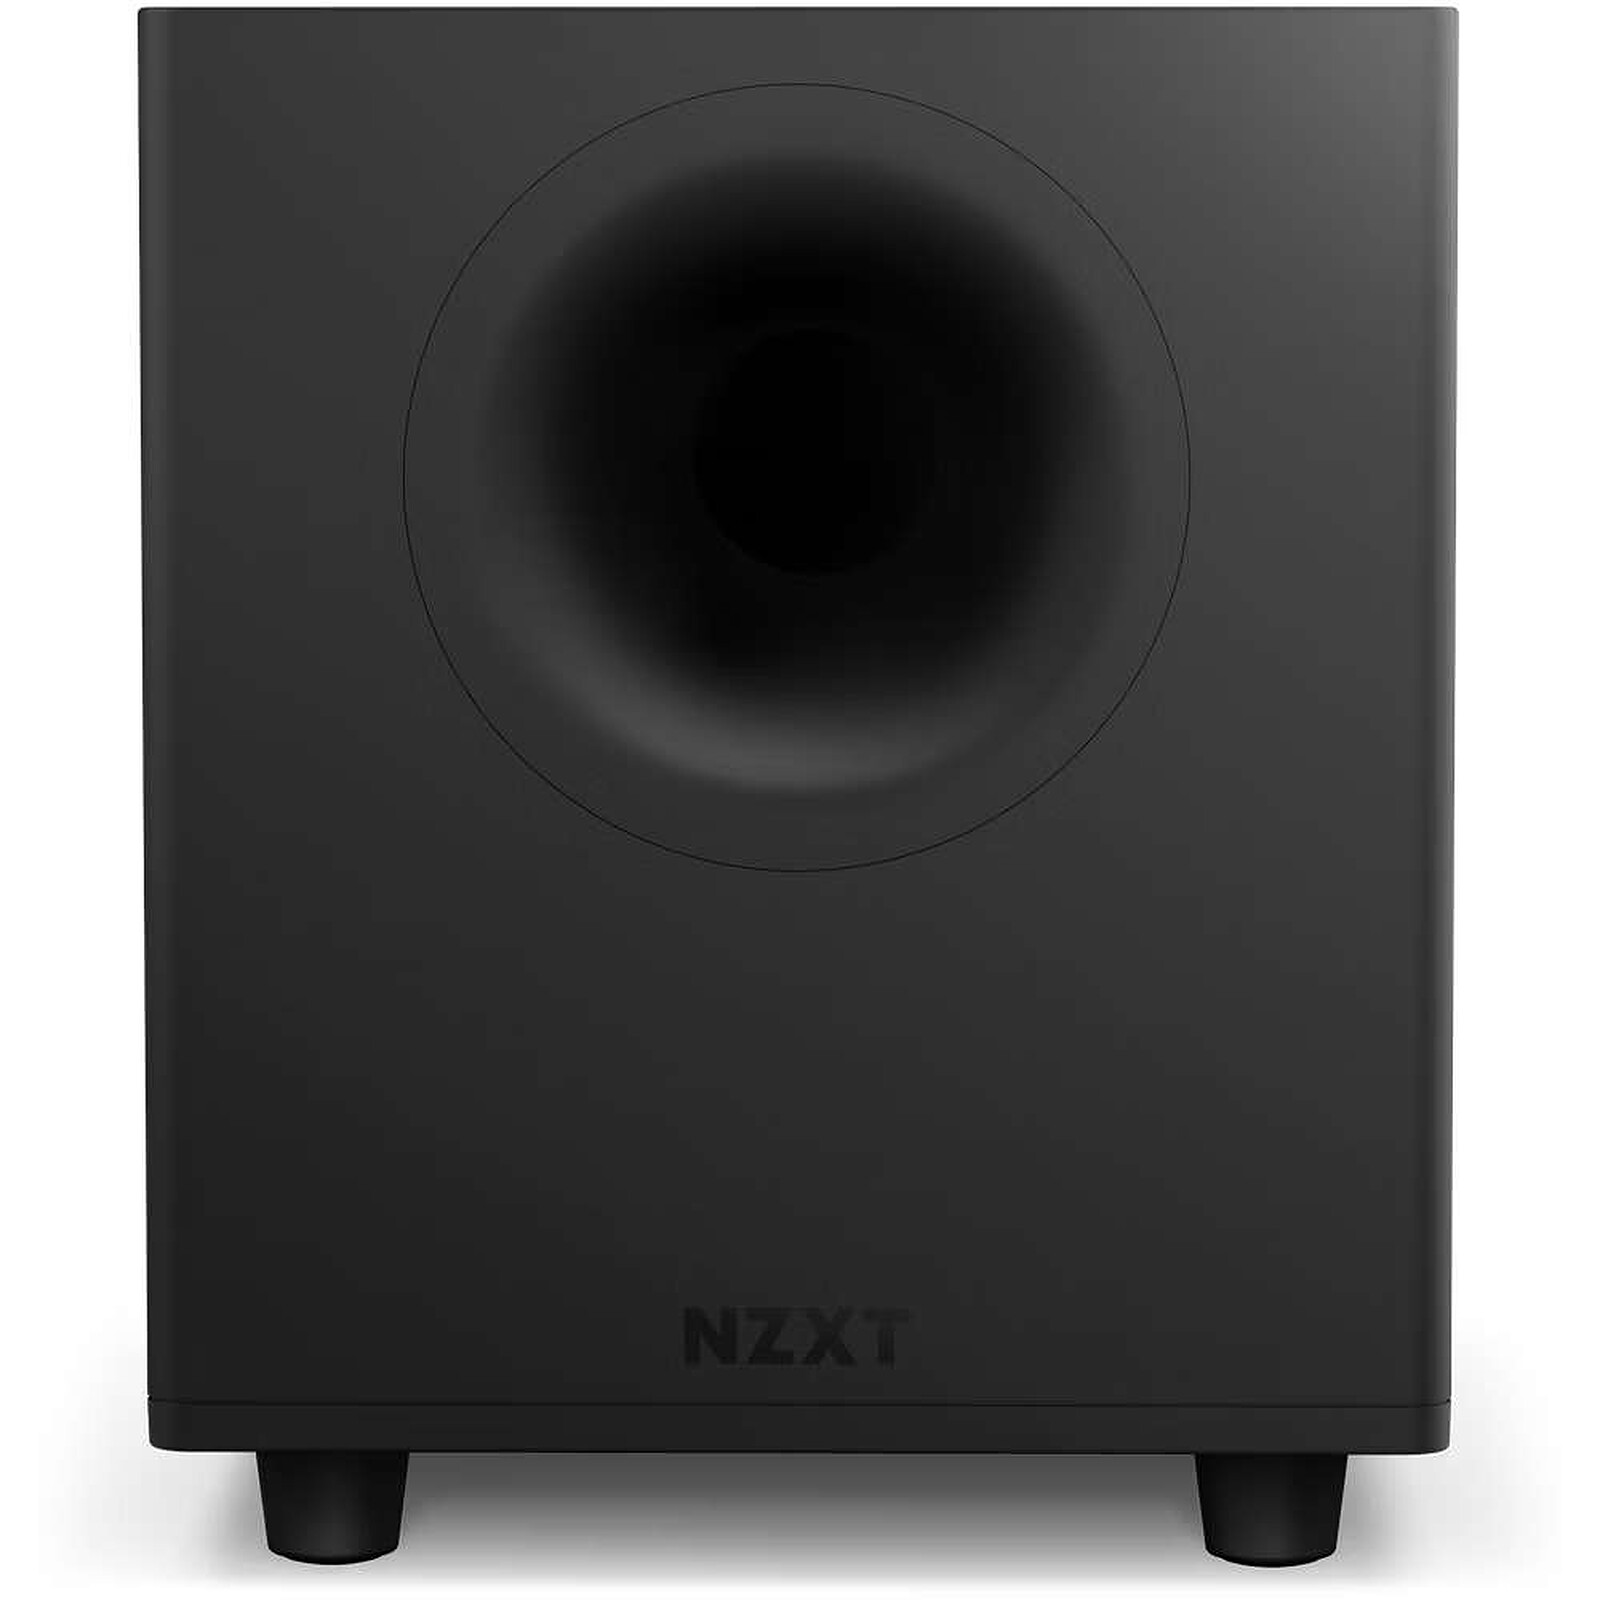 Subwoofer NZXT Relay - Altavoces PC - LDLC